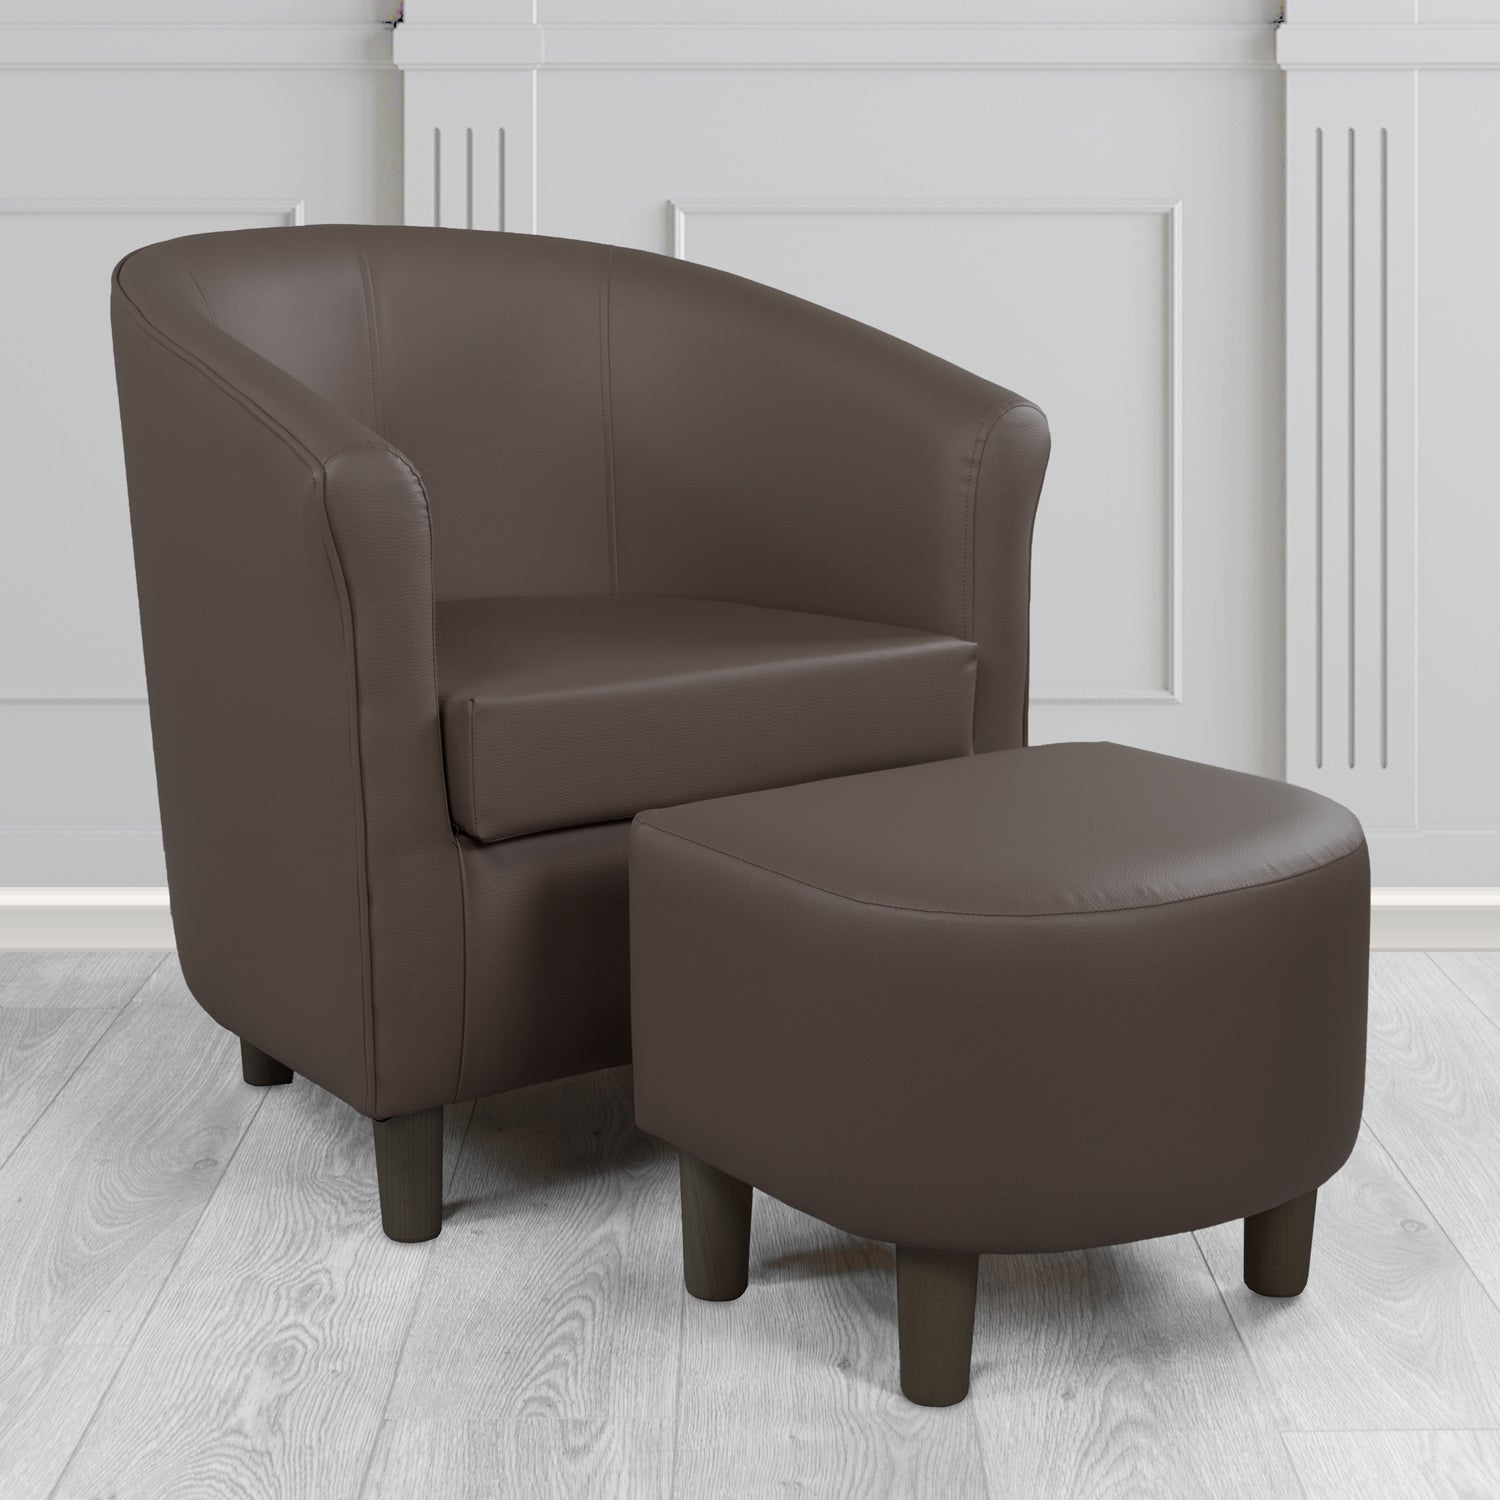 Tuscany Tub Chair with Footstool Set in Madrid Chocolate Faux Leather - The Tub Chair Shop